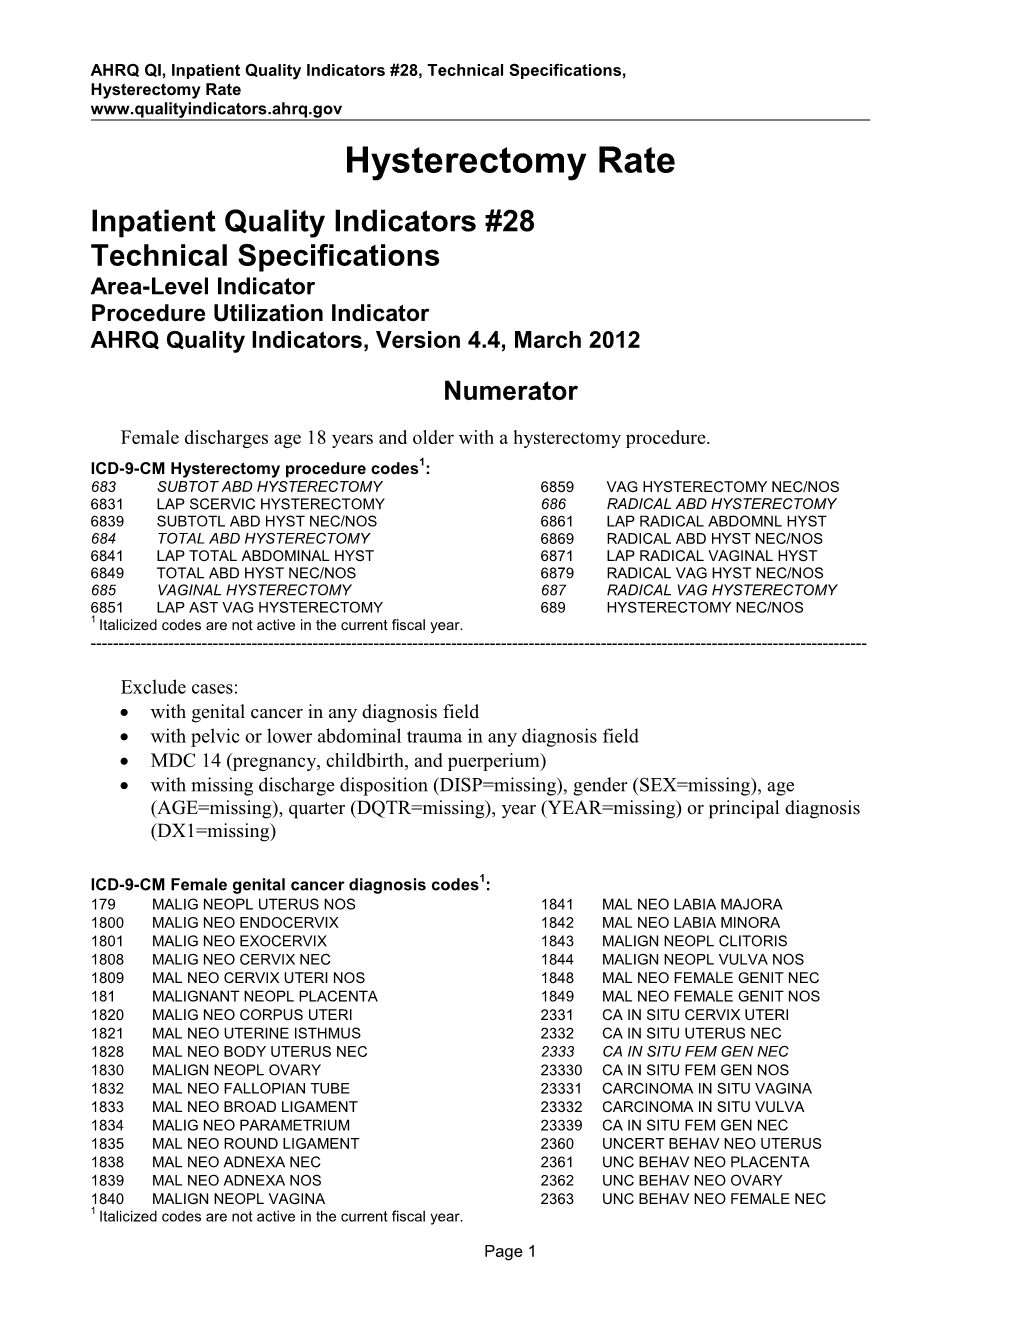 IQI 28 Hysterectomy Rate